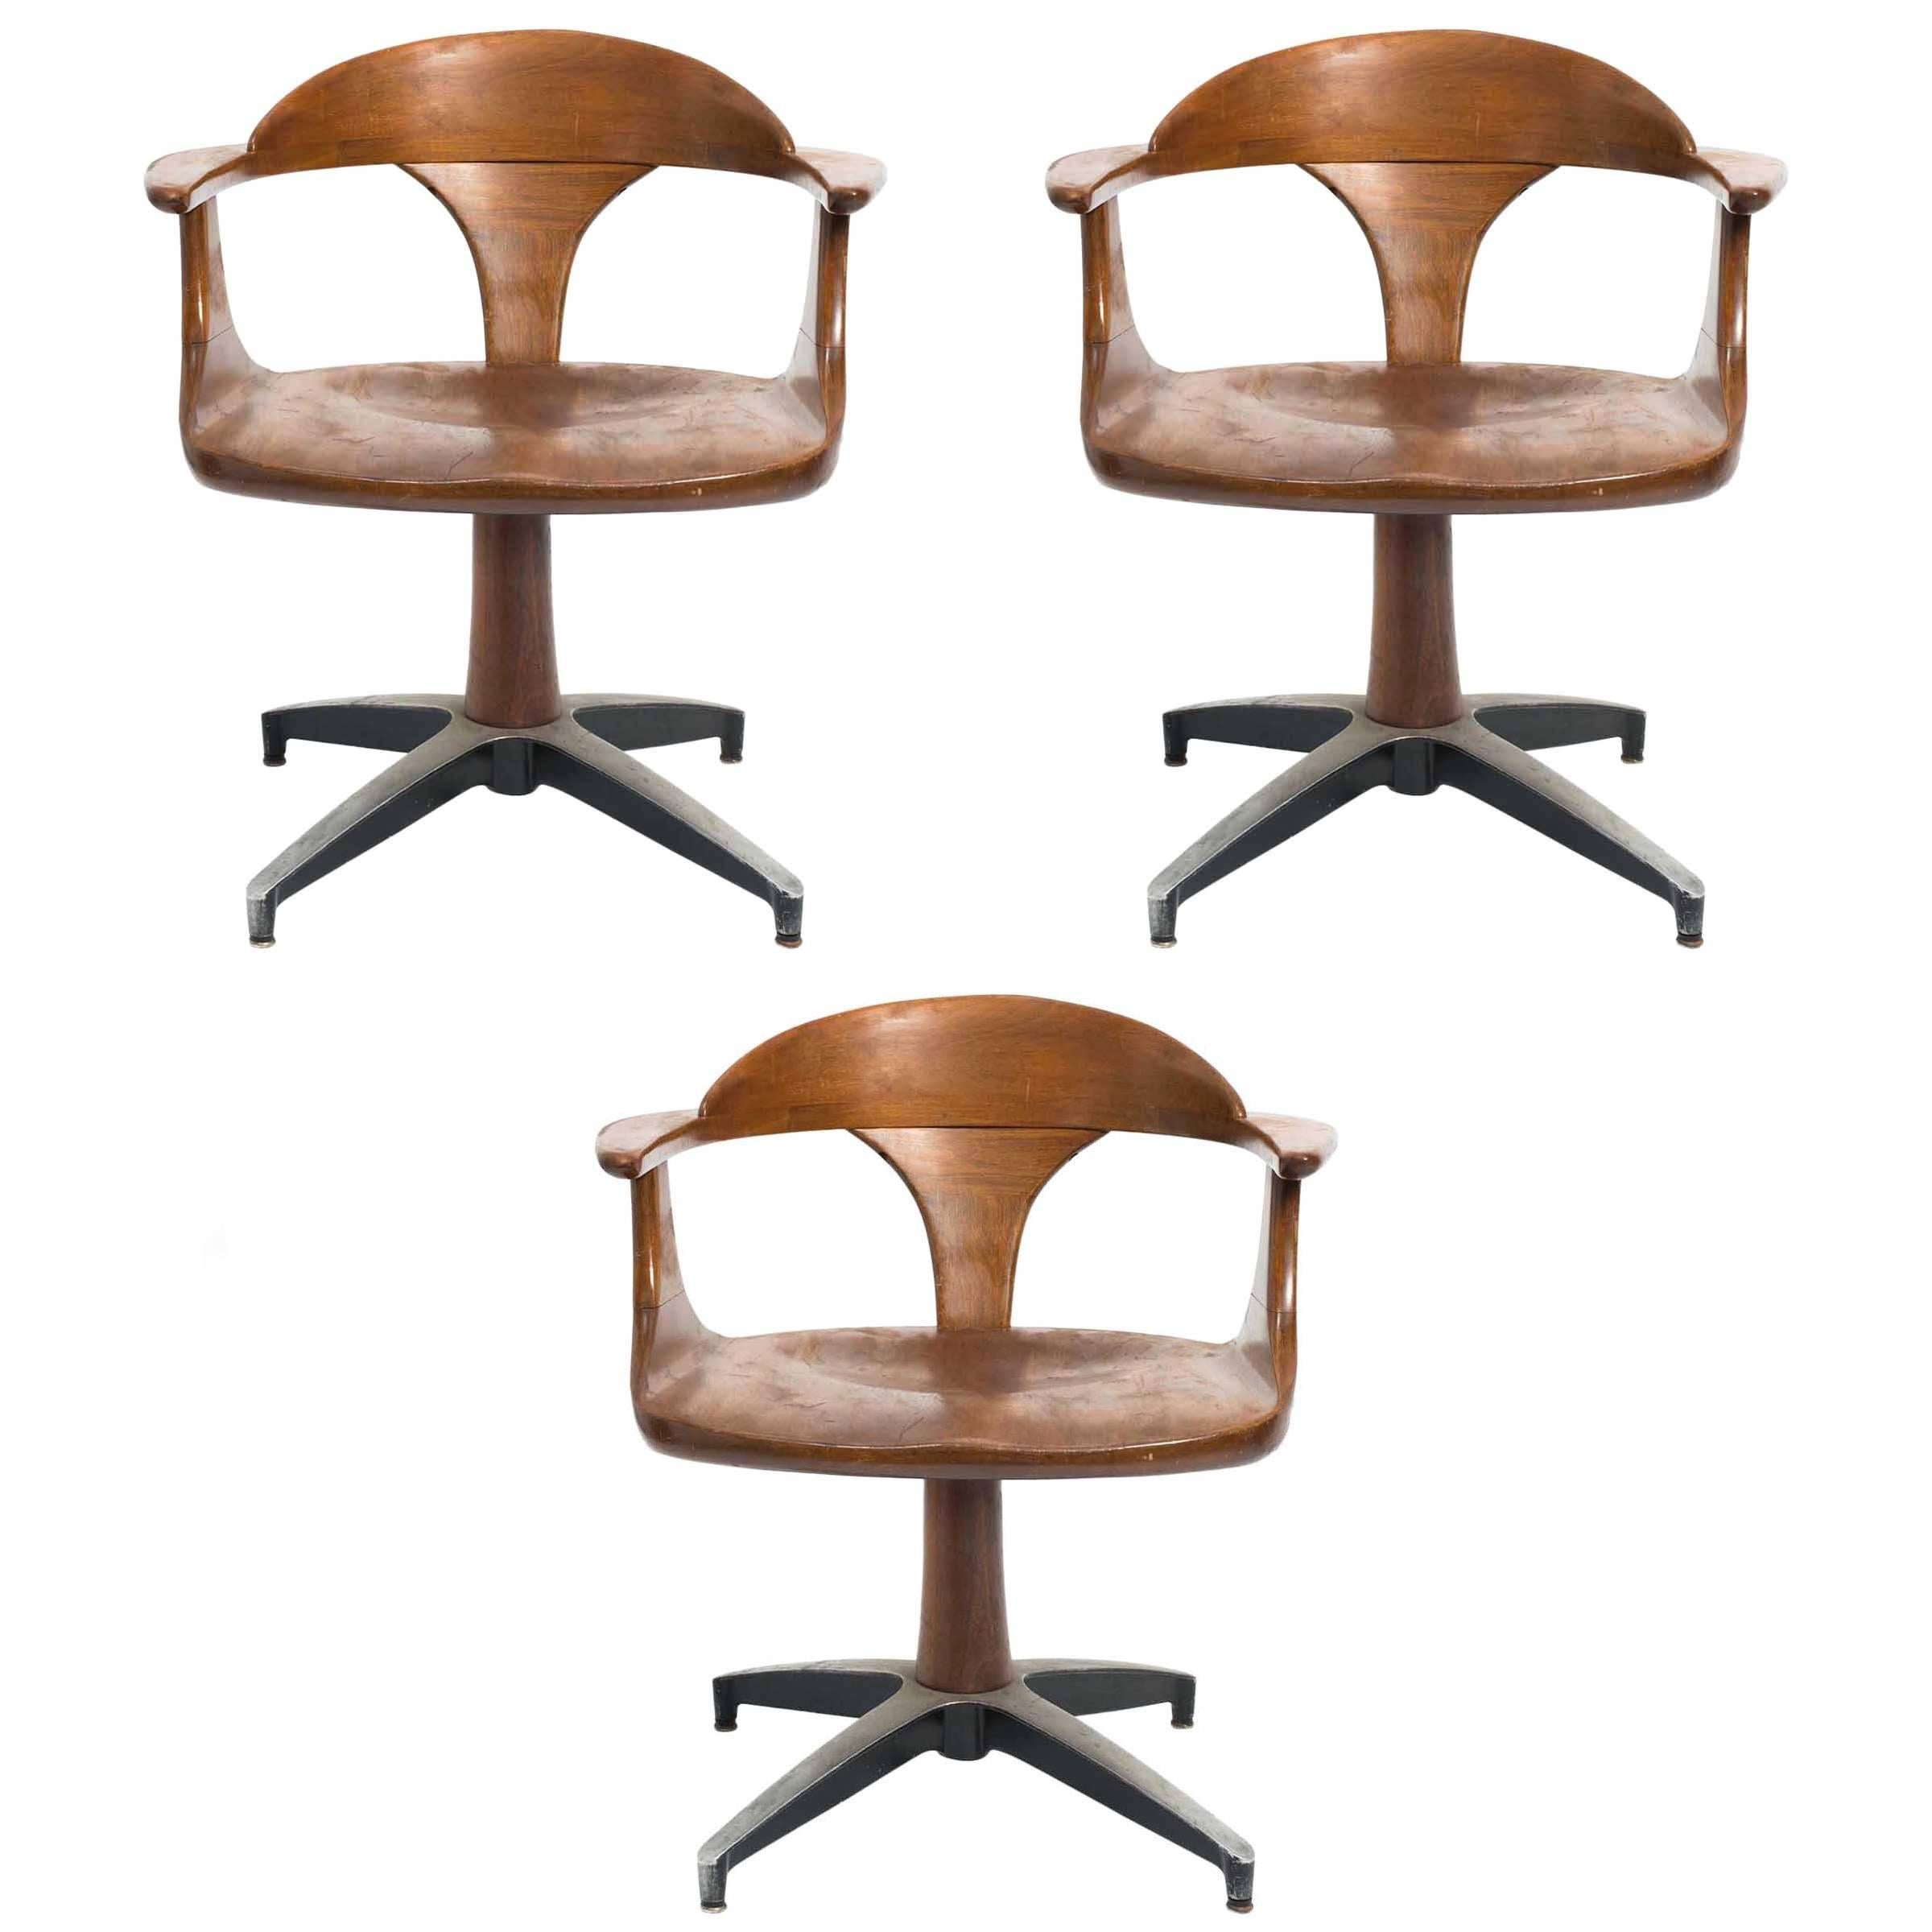 Three 1960s Wood Office Chairs